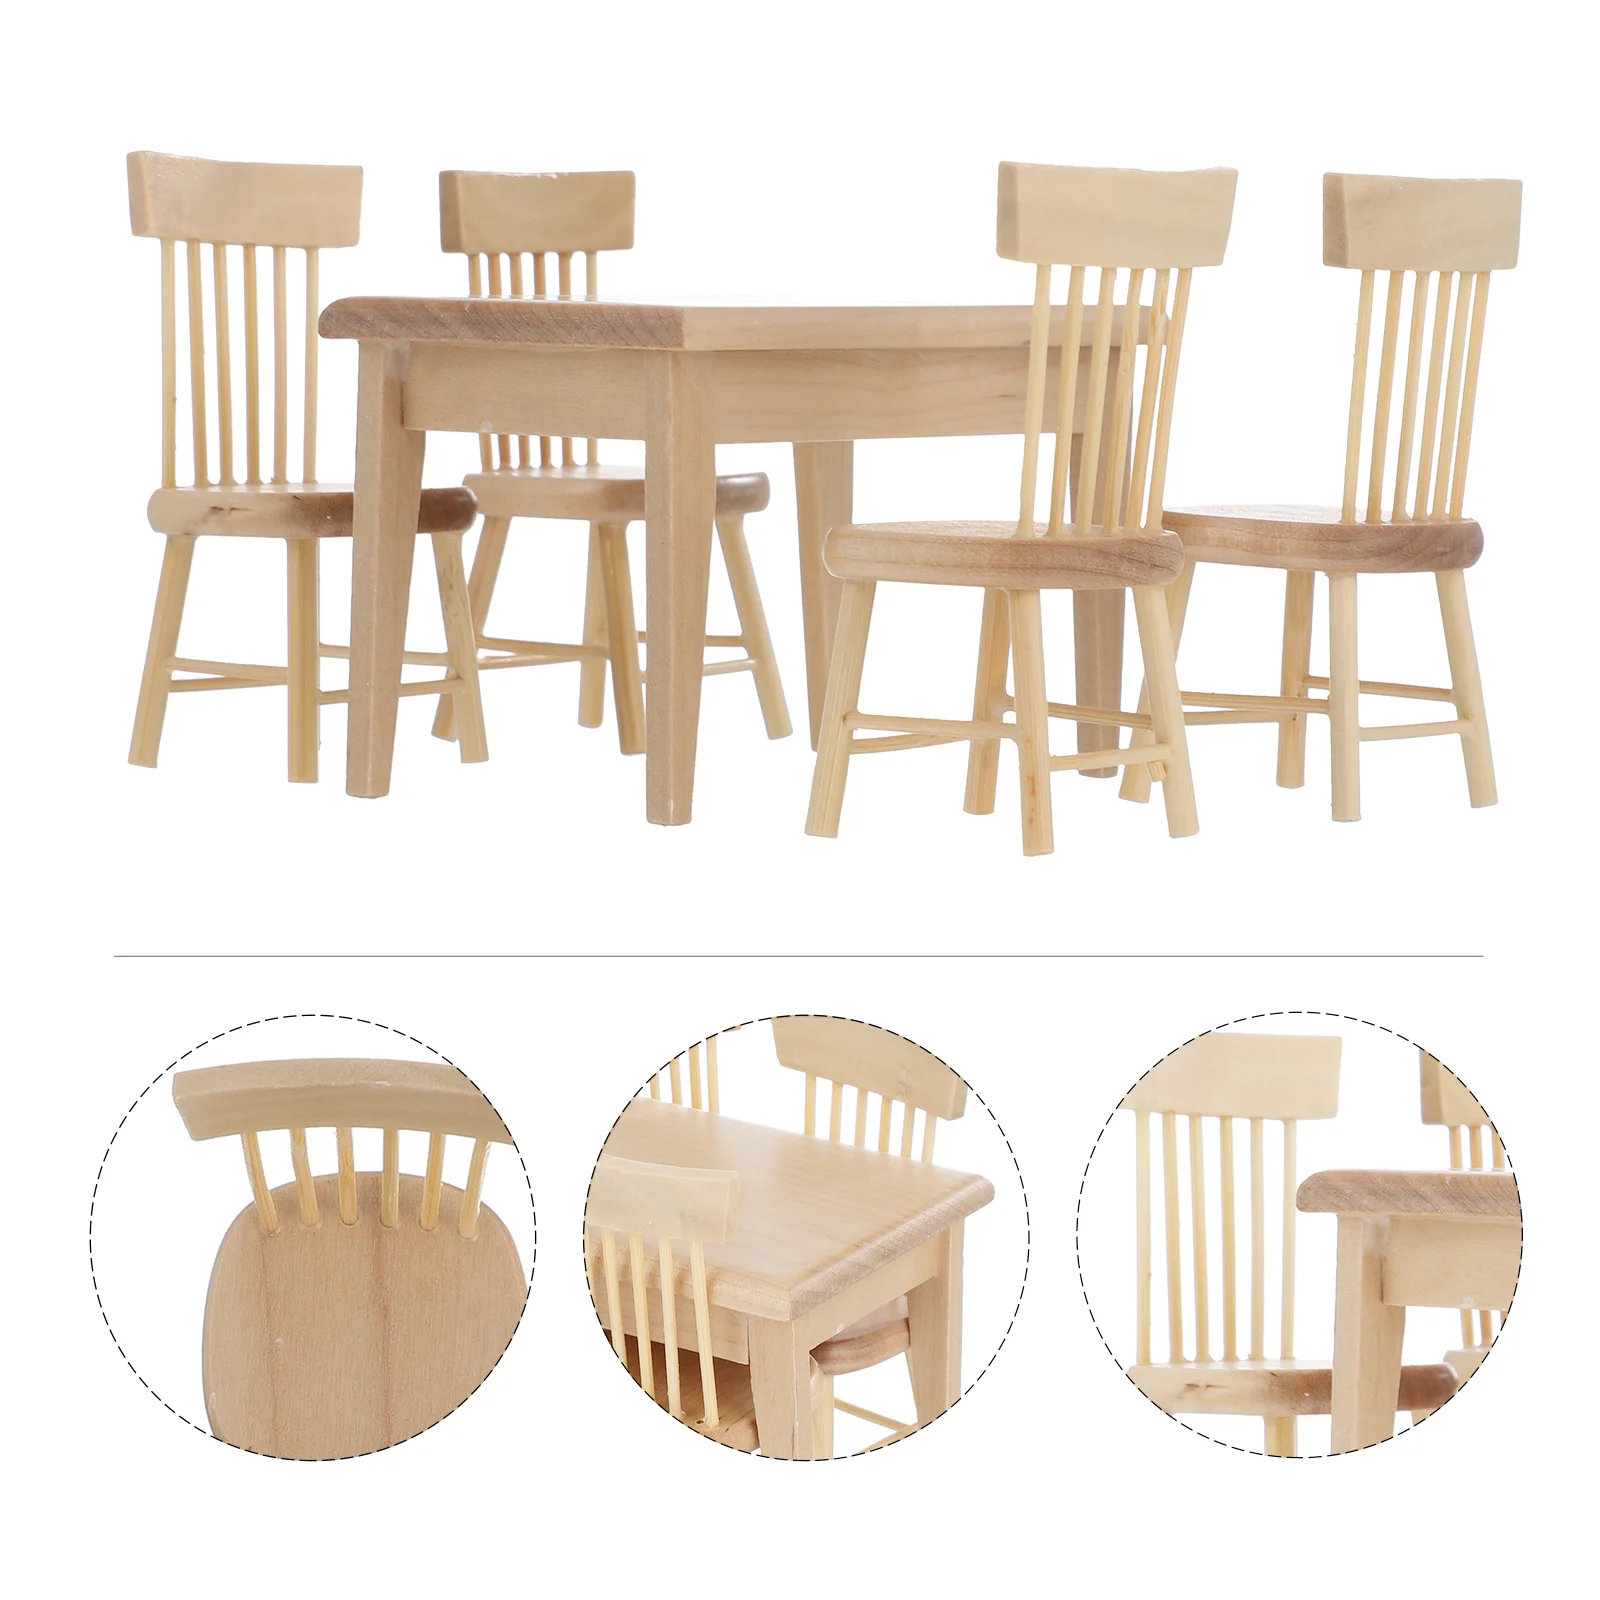 

Furniture Miniature Table Chair Bench House Wooden Mini Accessories Model Set Park Room Chairs Dining Decoration Scenery